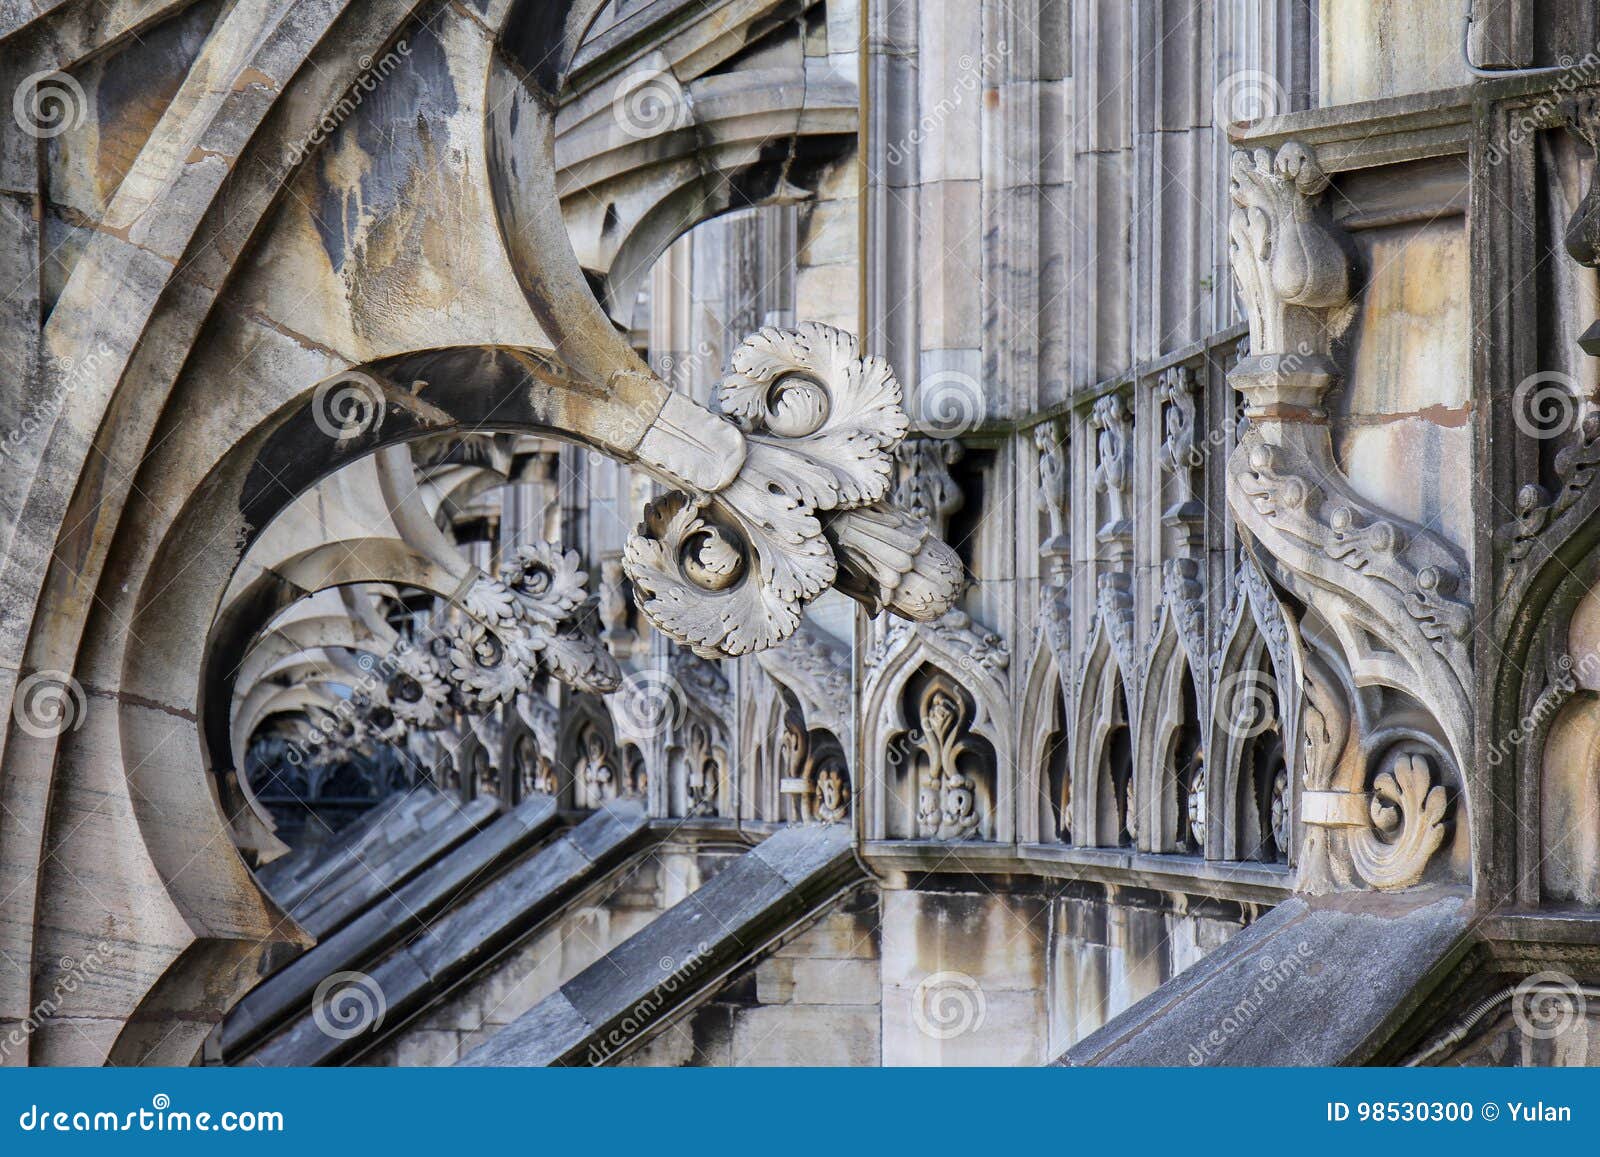 architectonic details of dumo cathedral, milanitaly